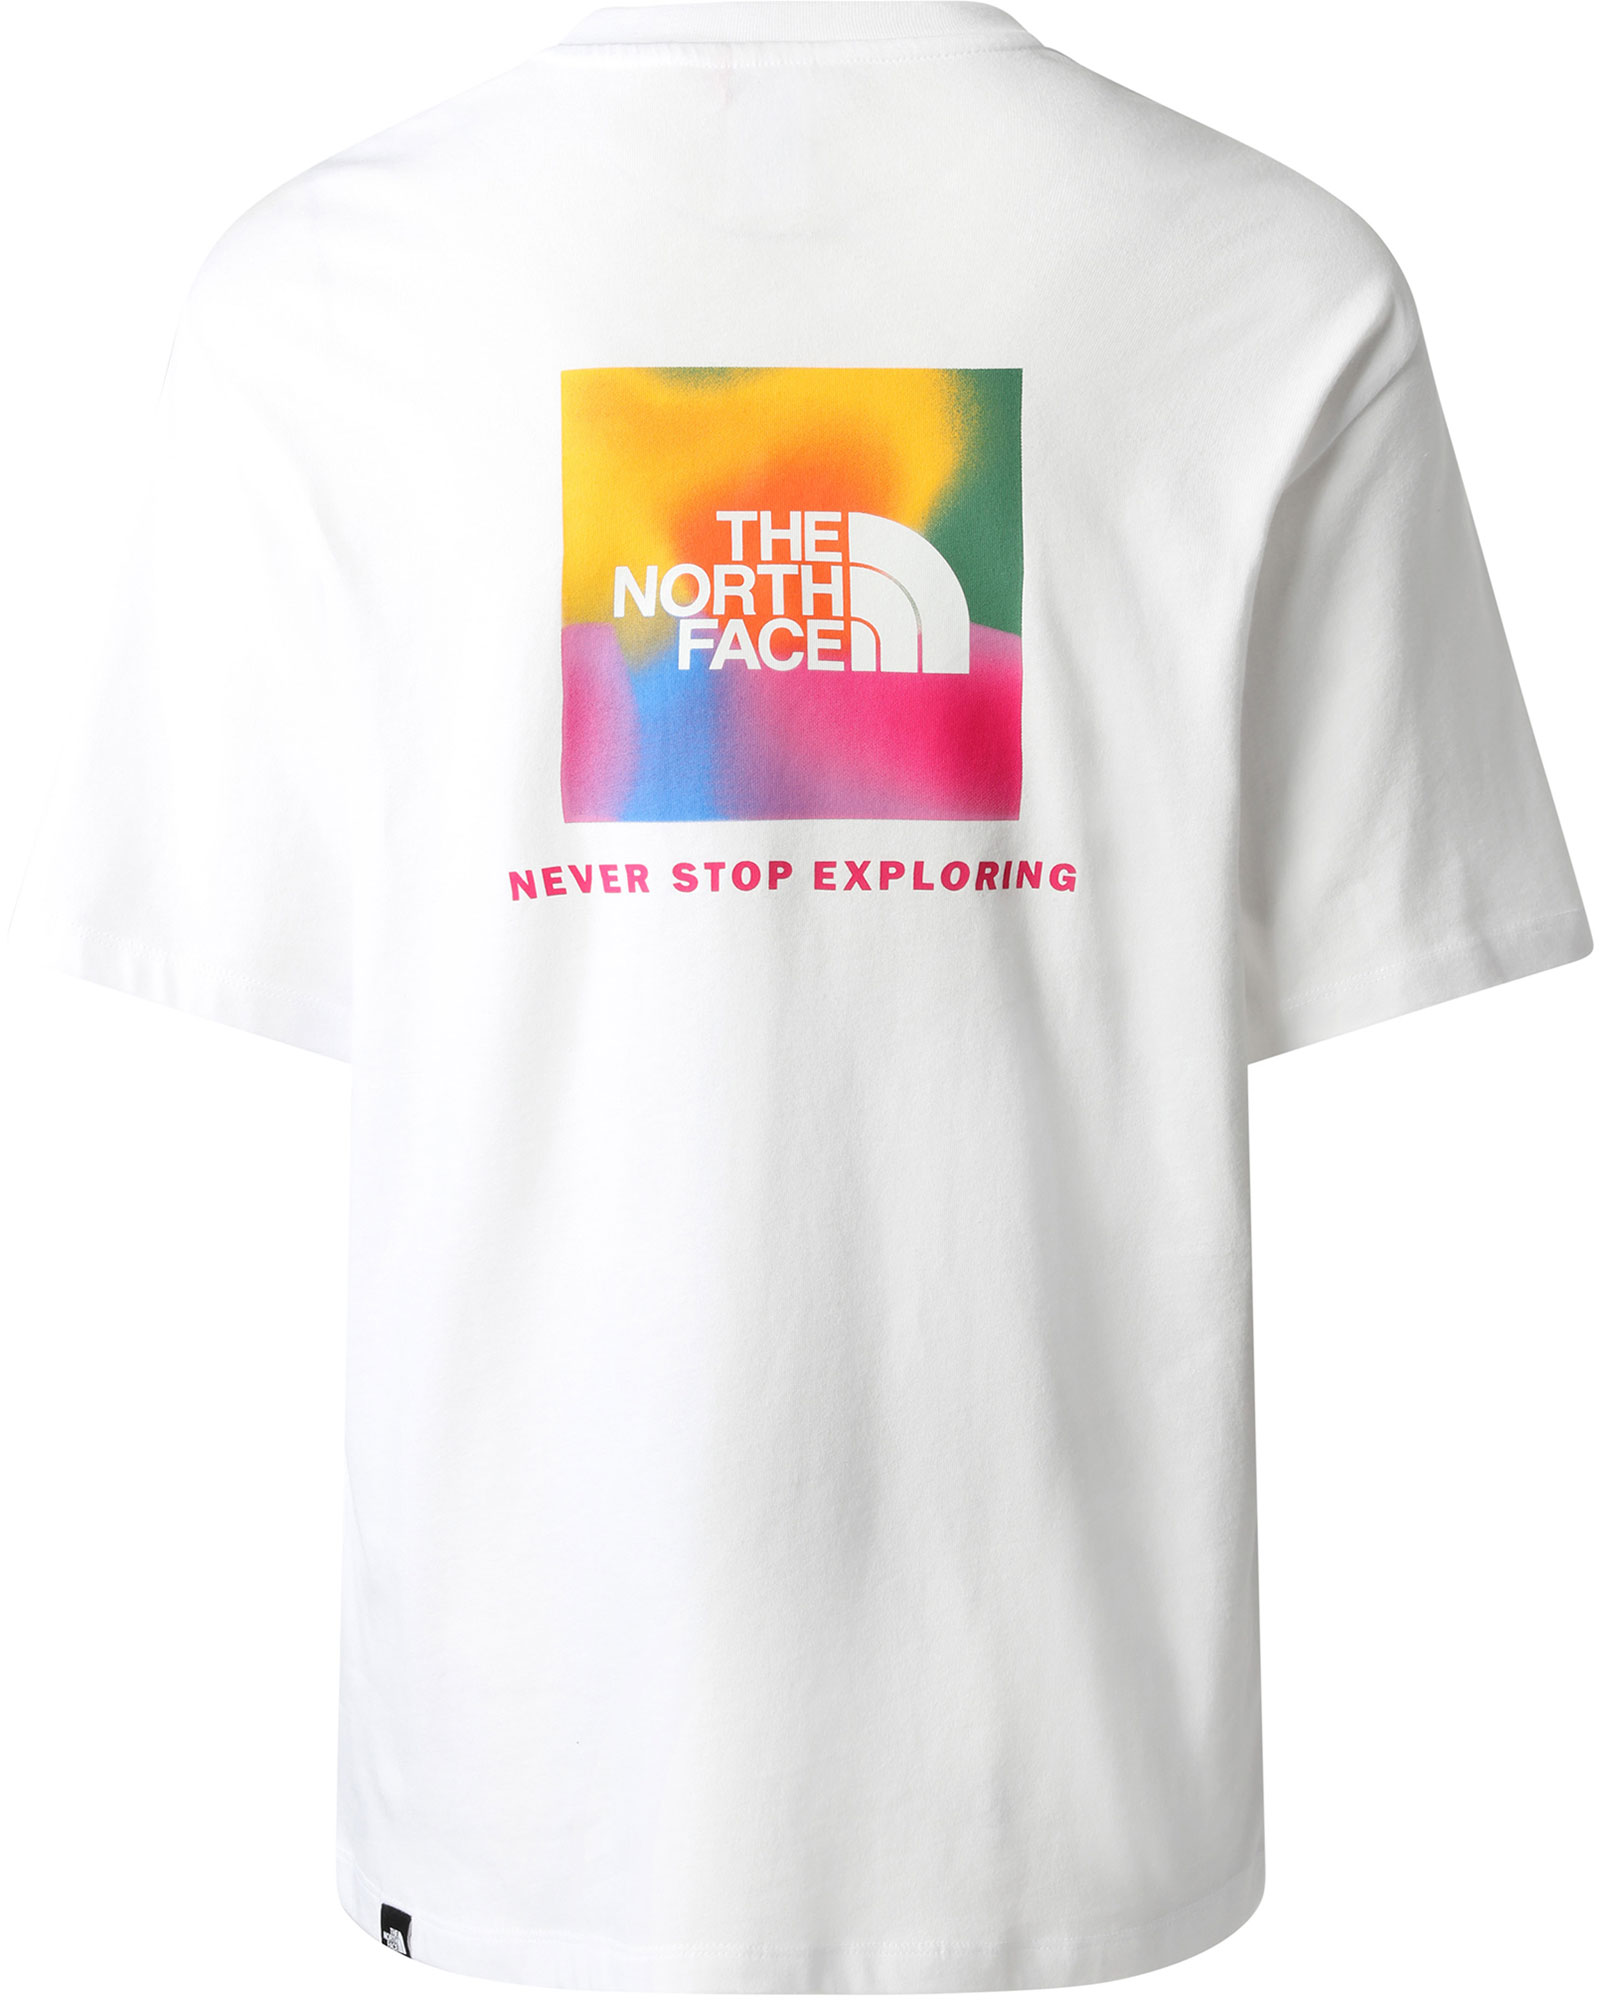 The North Face Relaxed Redbox Women’s T Shirt - TNF White/Super Sonic Print XL